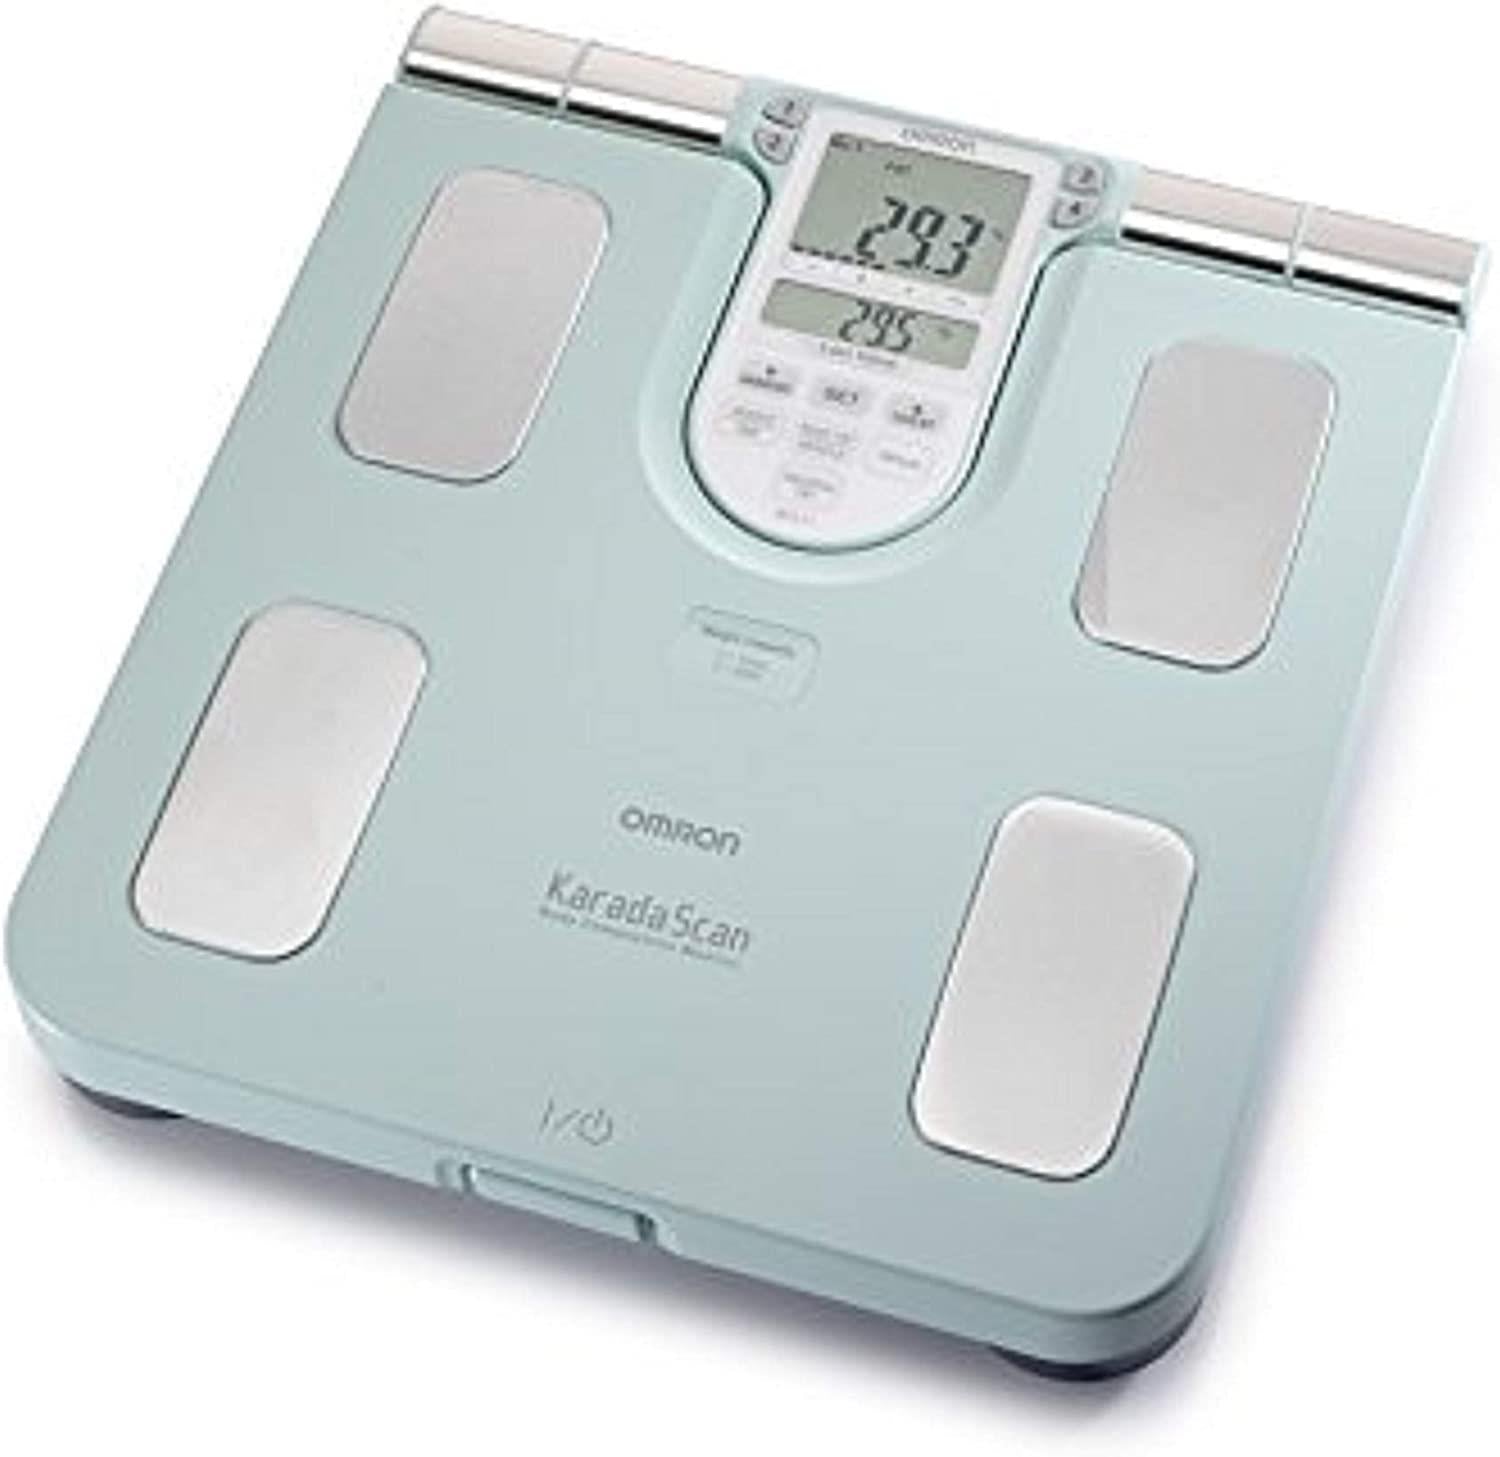 Omron Family Body Composition Digital BMI Muscle Bathroom Weighing Scales - BF511TE